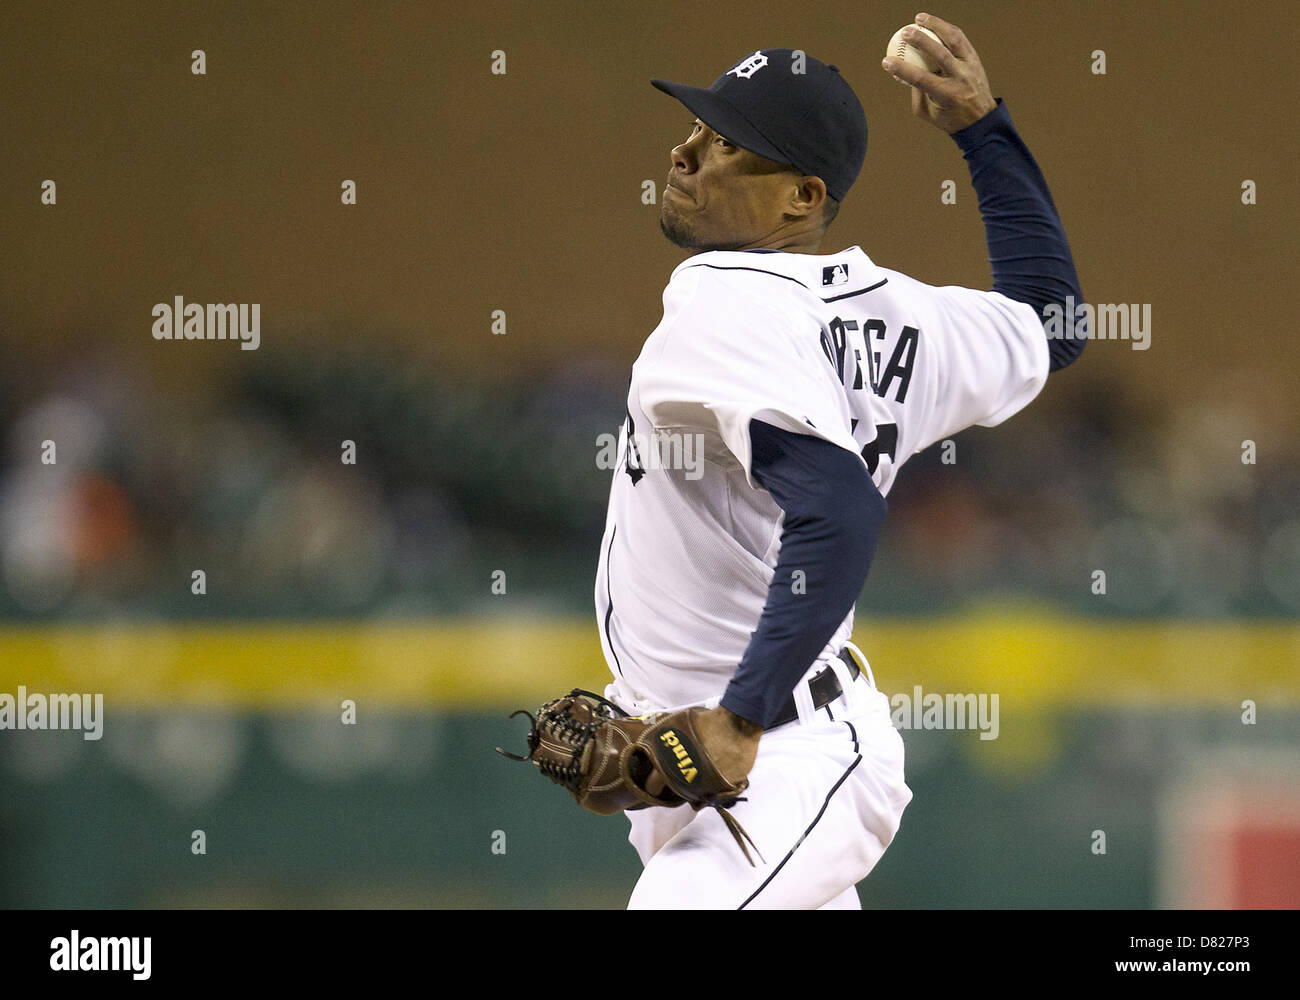 May 13, 2013 - Detroit, Michigan, United States of America - May 13, 2013: Detroit Tigers pitcher Jose Ortega (56) delivers pitch during MLB game action between the Houston Astros and the Detroit Tigers at Comerica Park in Detroit, Michigan. The Tigers defeated the Astros 7-2. Stock Photo